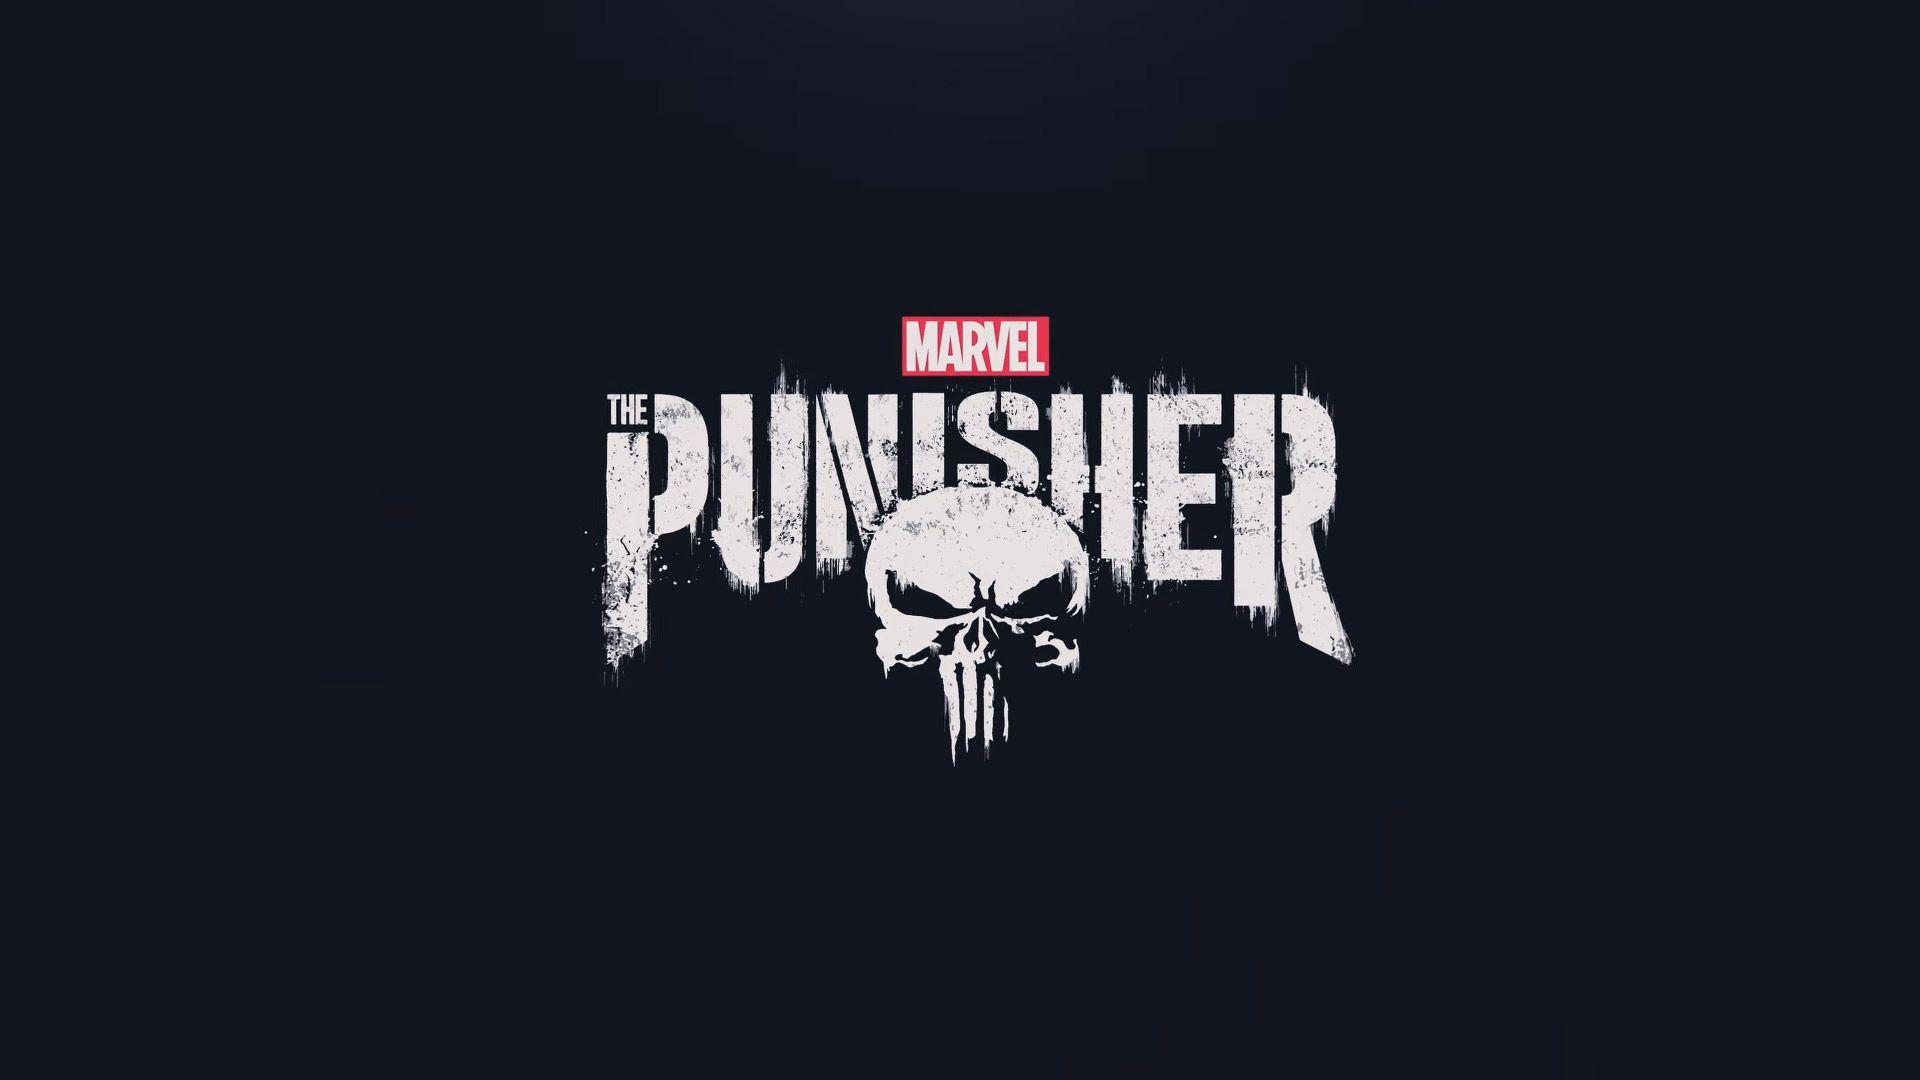 The Punisher 2017 HD Logo, HD Tv Shows, 4k Wallpapers, Image